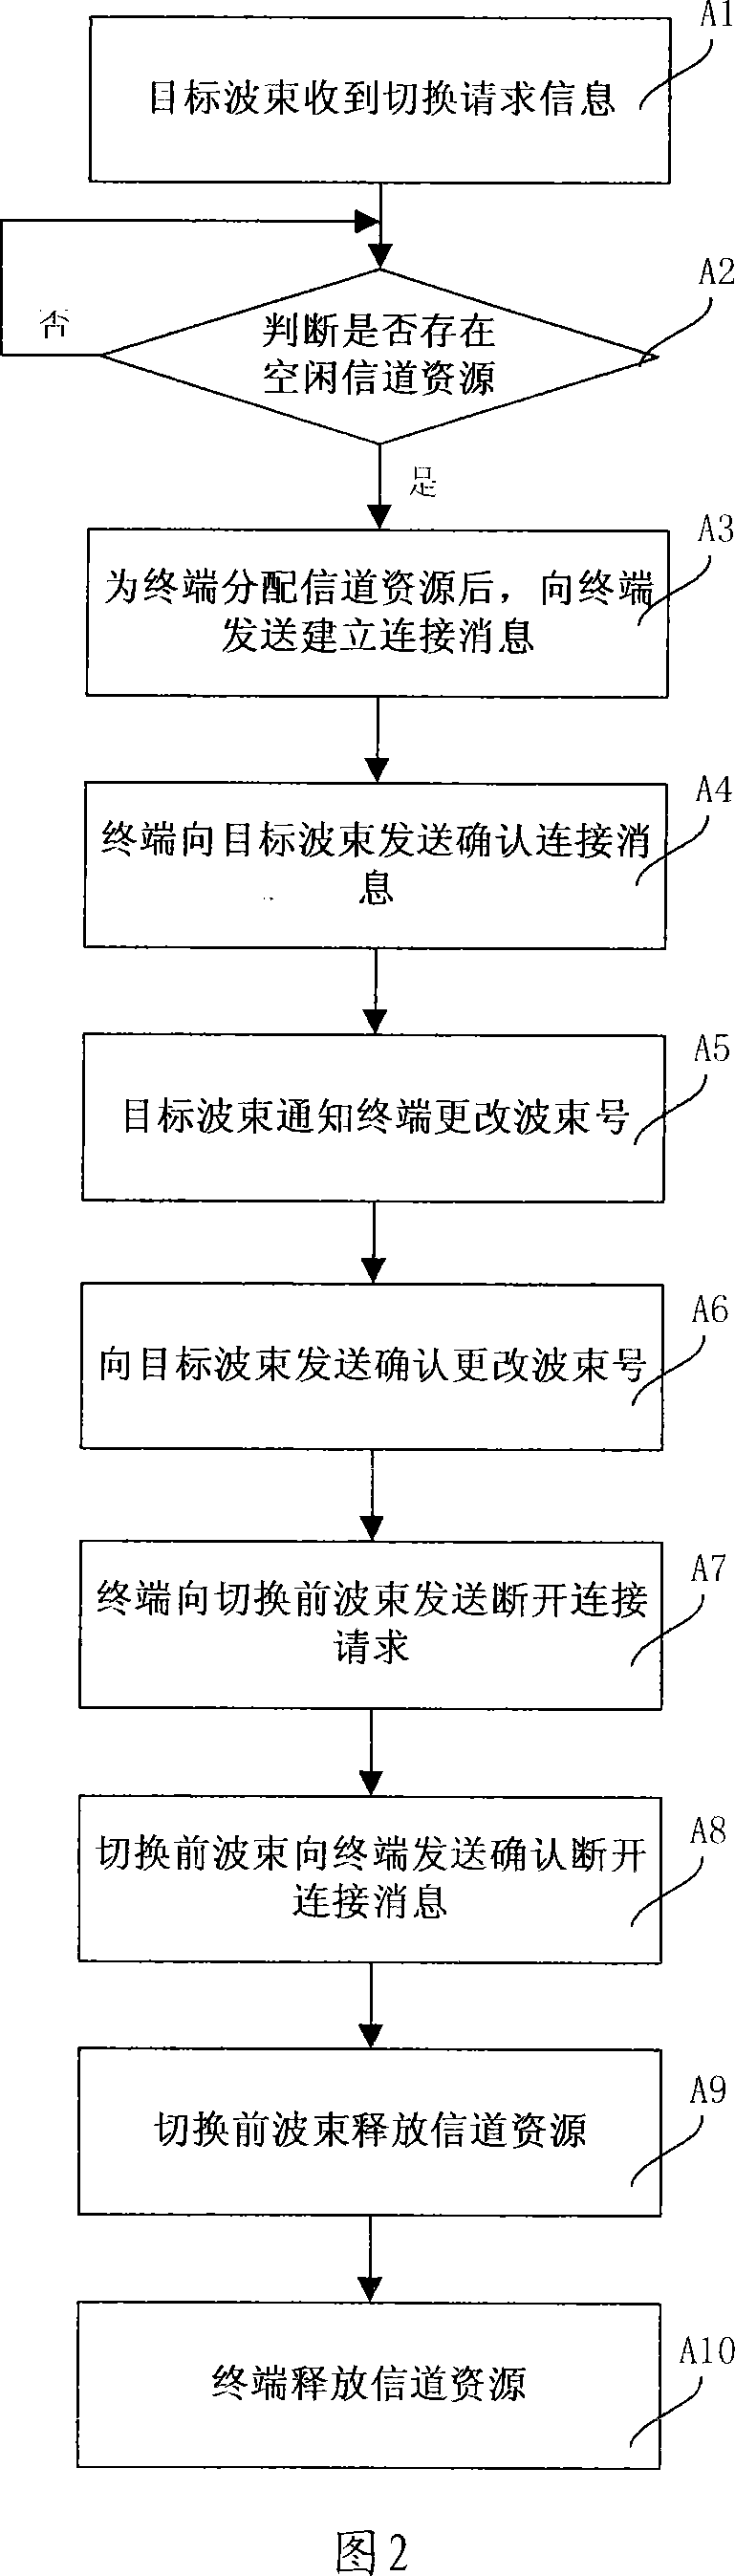 Planet-earth link switching method and planet-earth link switching mode selection processing device